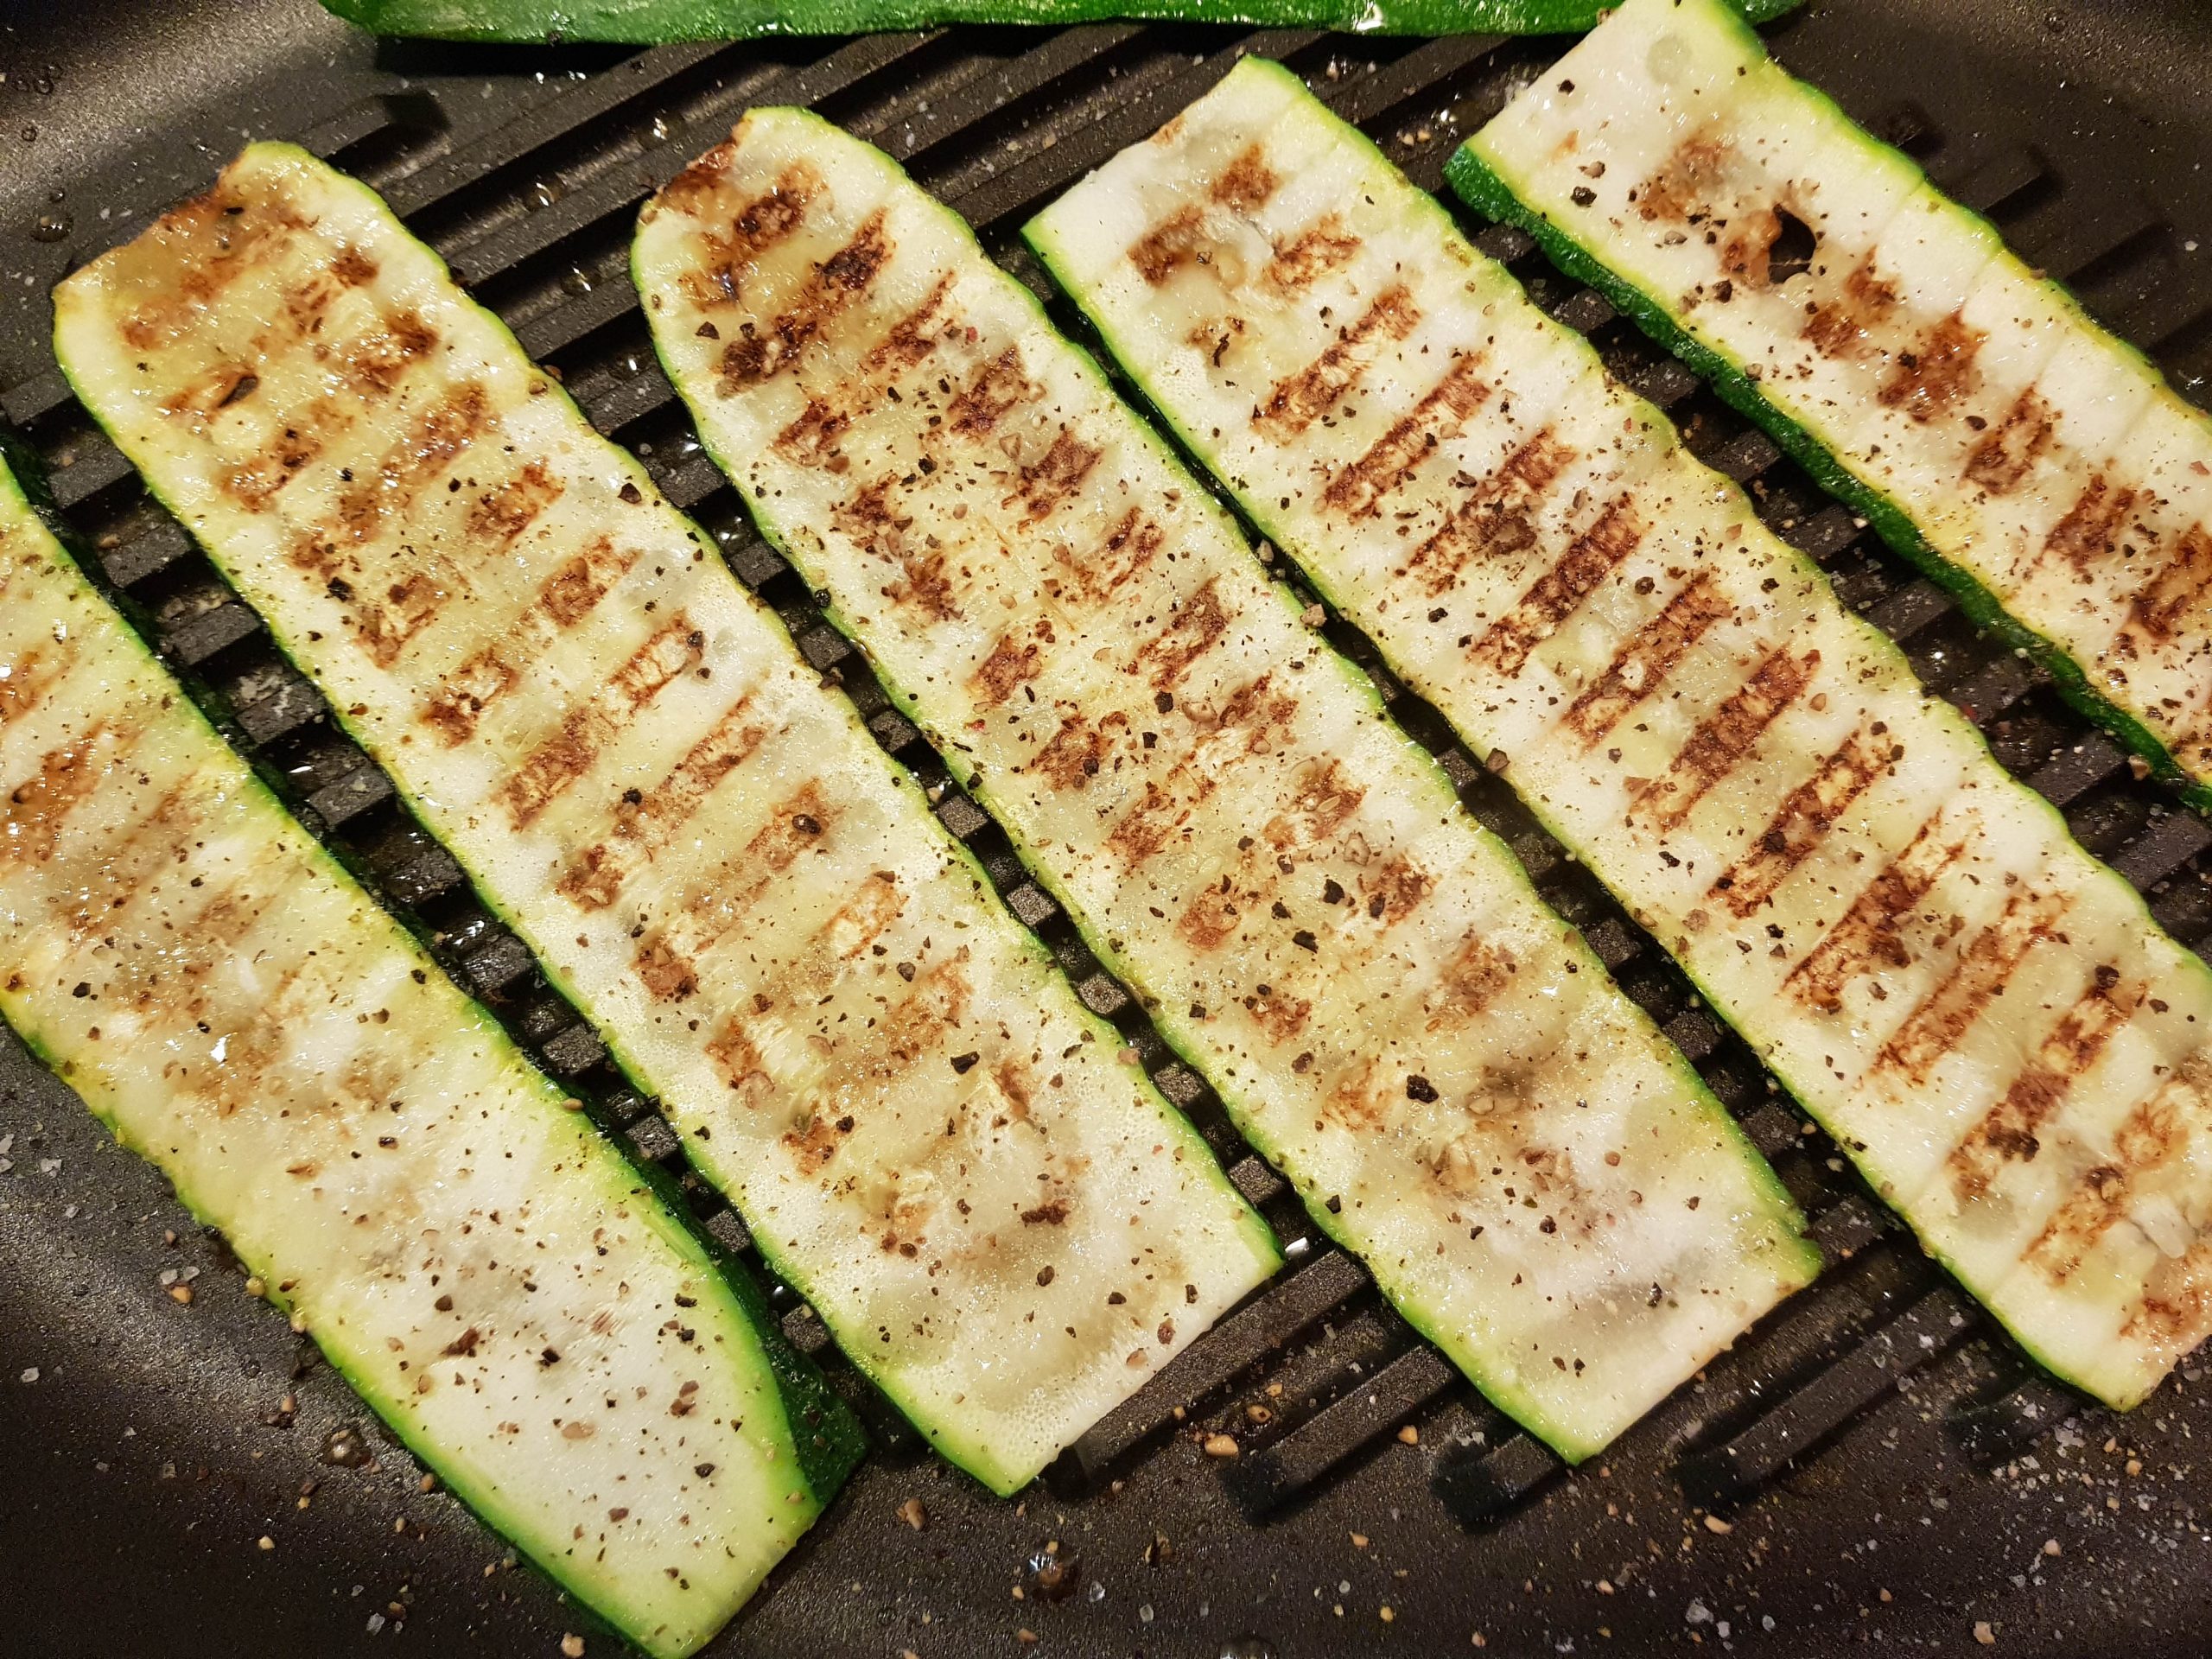 Sliced,Courgette,With,Herbs,Spices,And,Olive,Oil